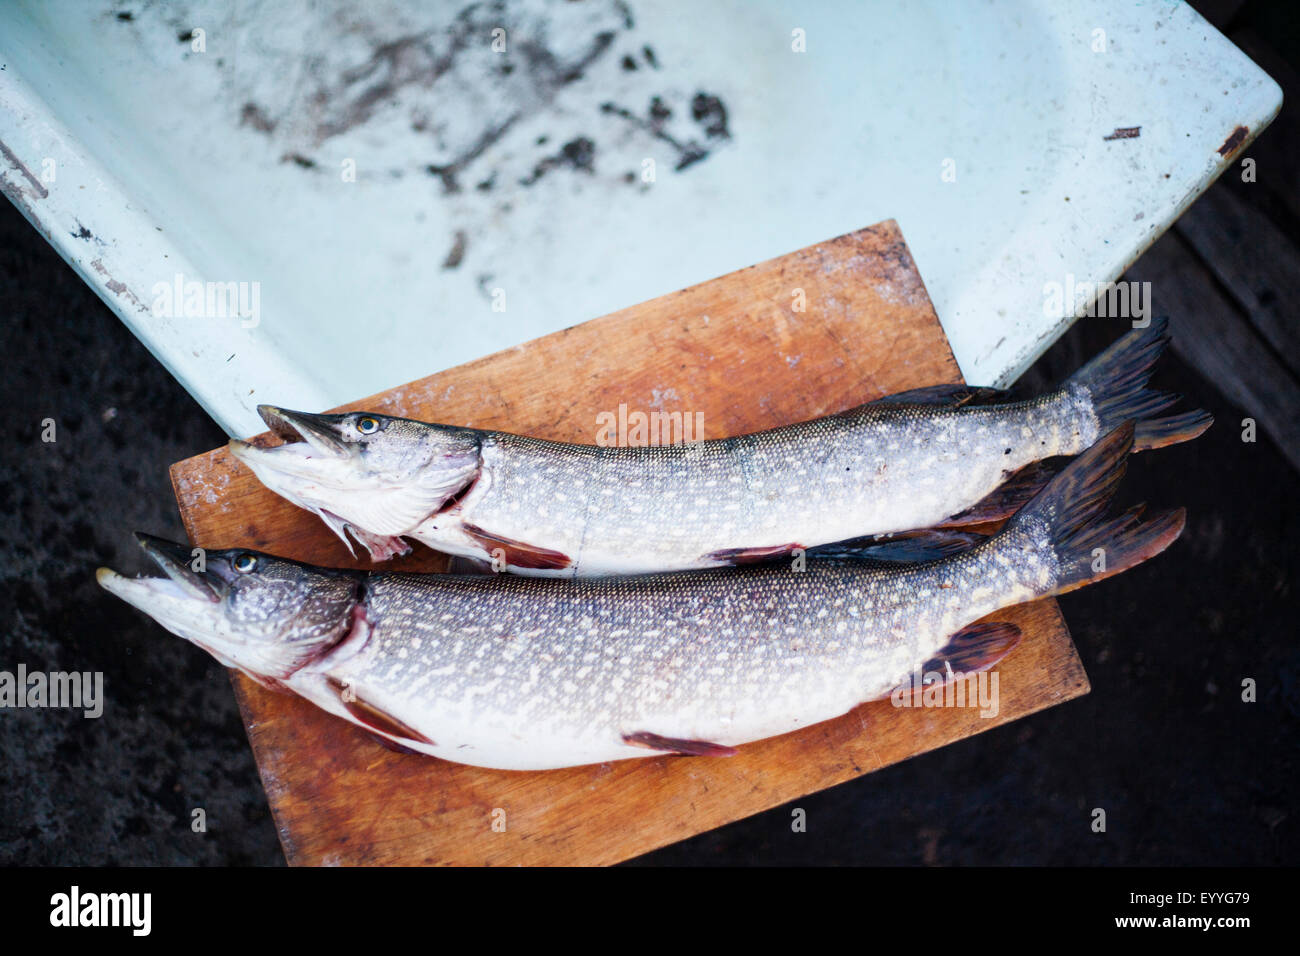 Close up of fresh caught fish on cutting board Stock Photo